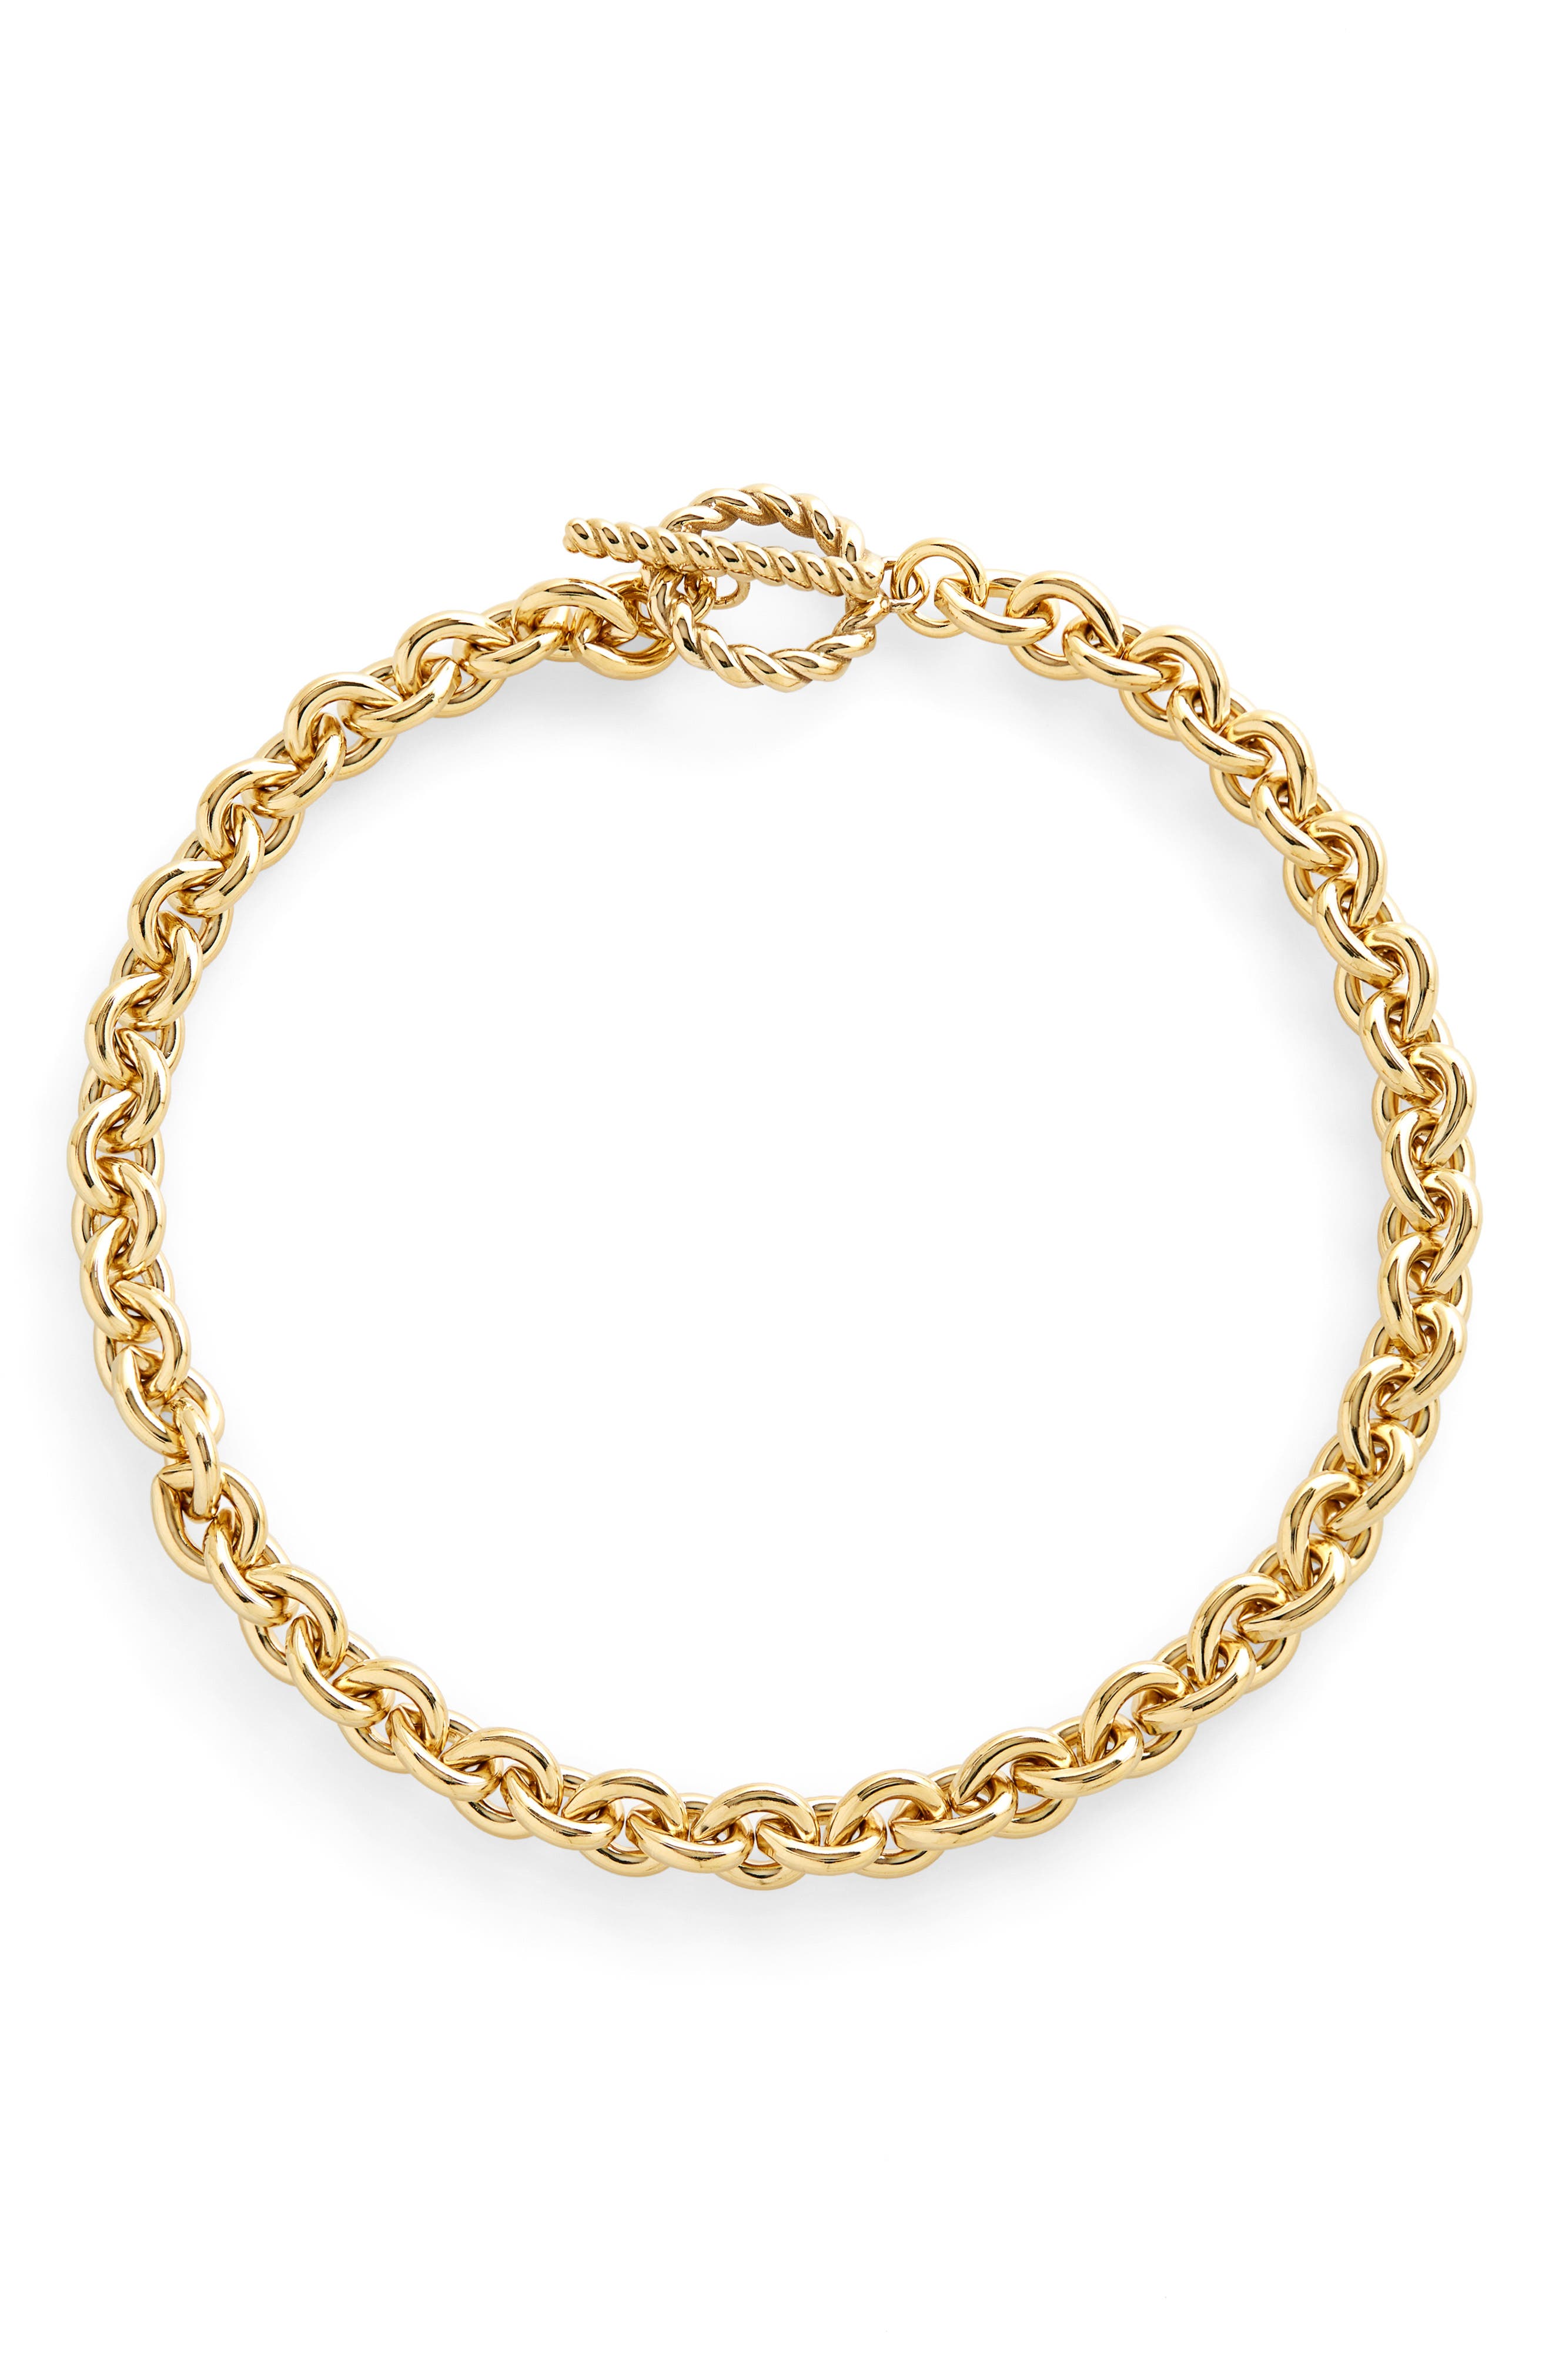 Laura Lombardi Braided Toggle Chain Necklace in Brass at Nordstrom, Size 18 In Us